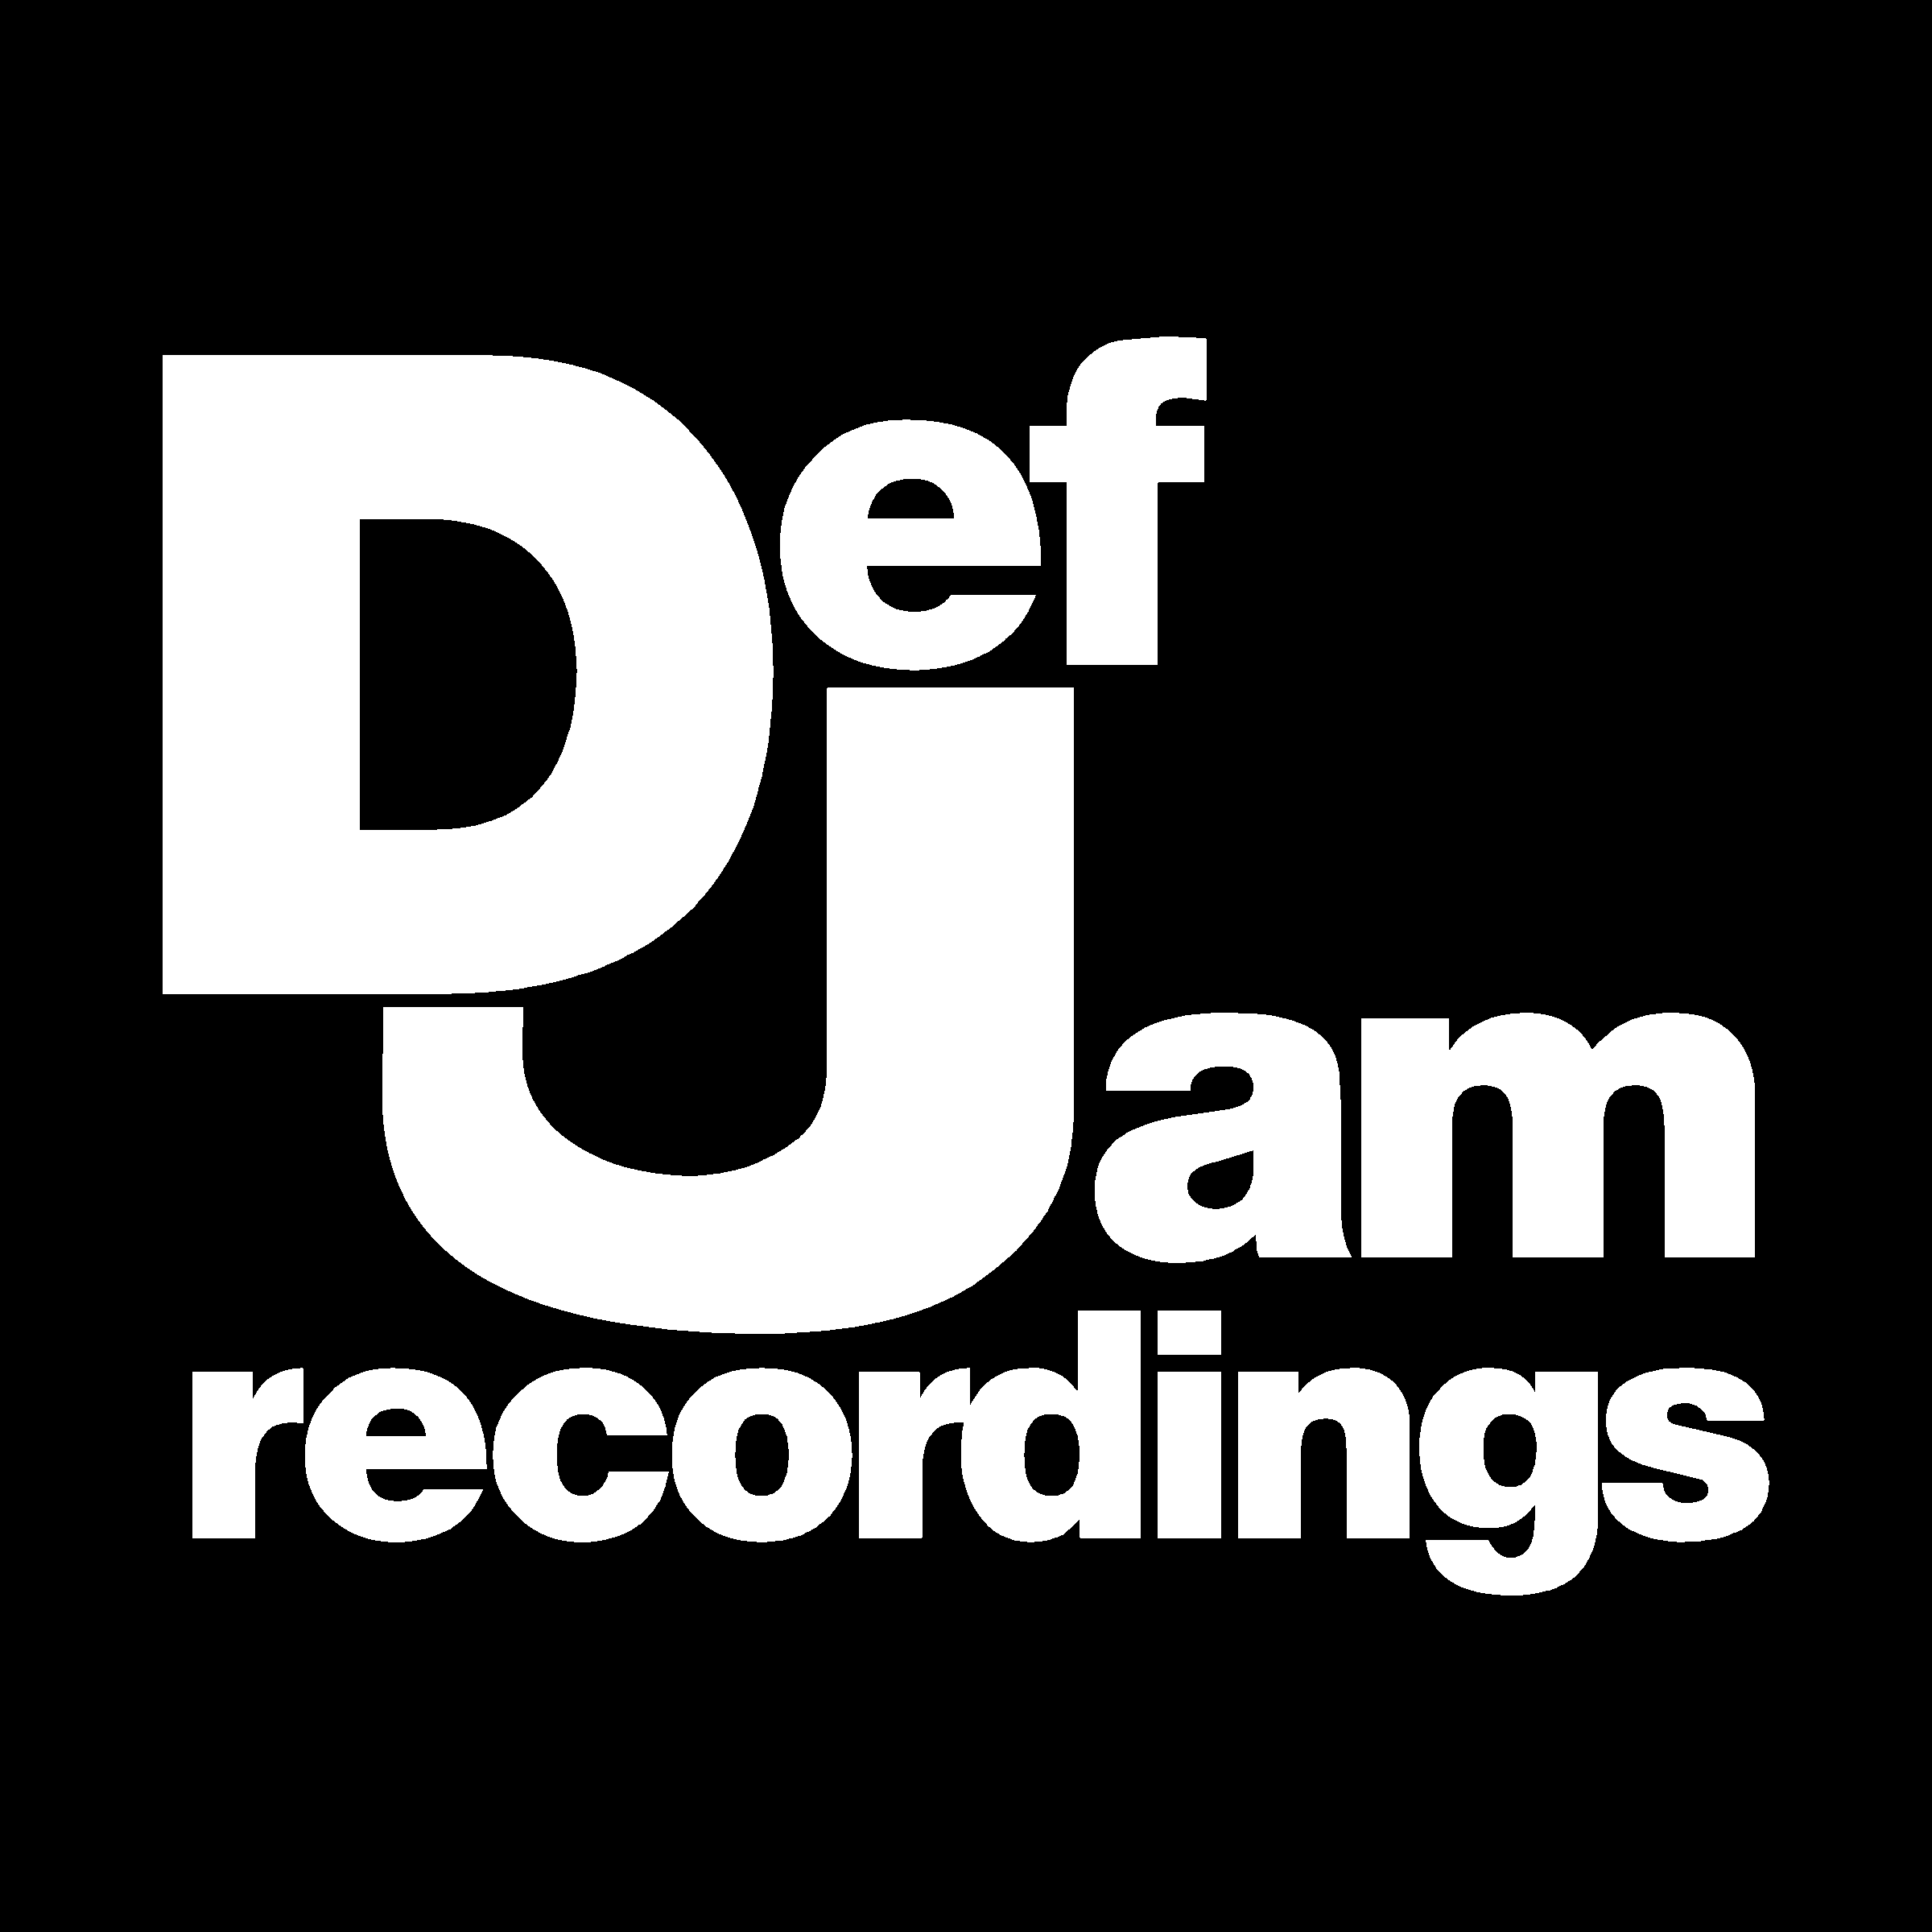 def-jam-recordings-corporate-logotype-logo-black-and-white.png